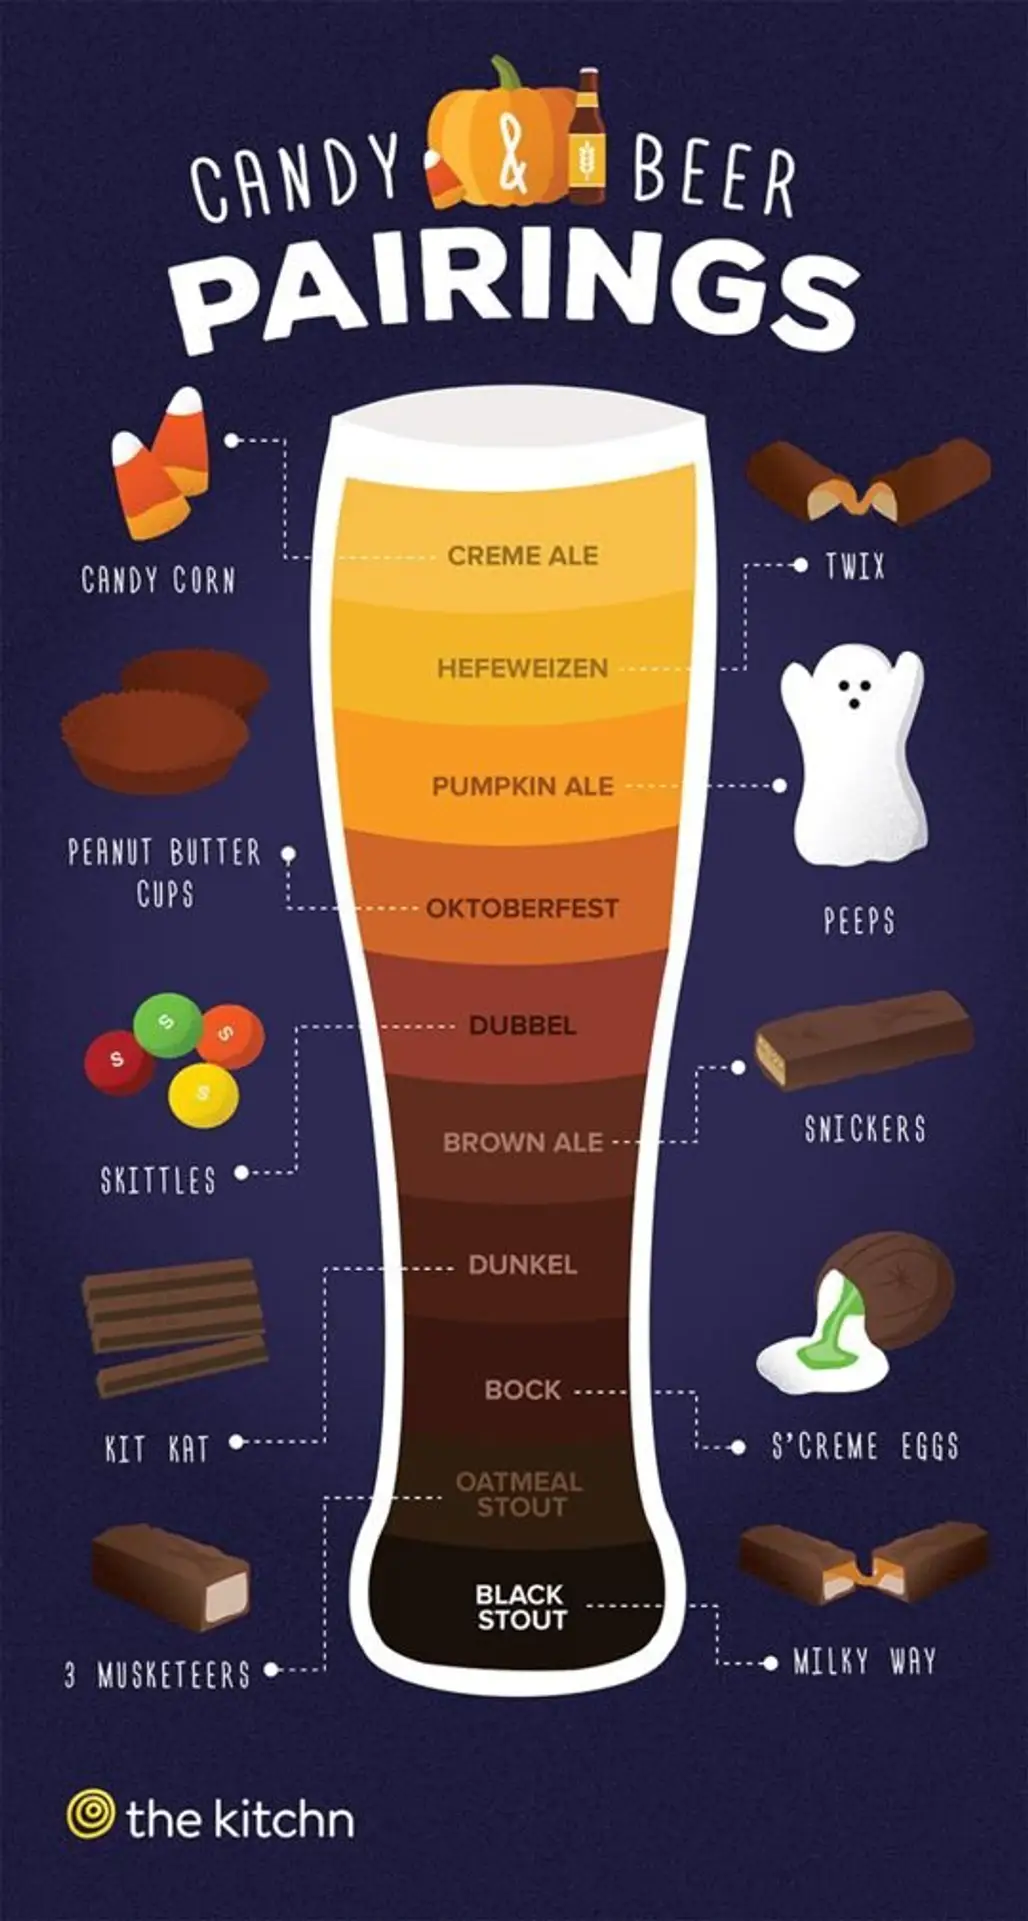 Trick or Treat, then Beer!